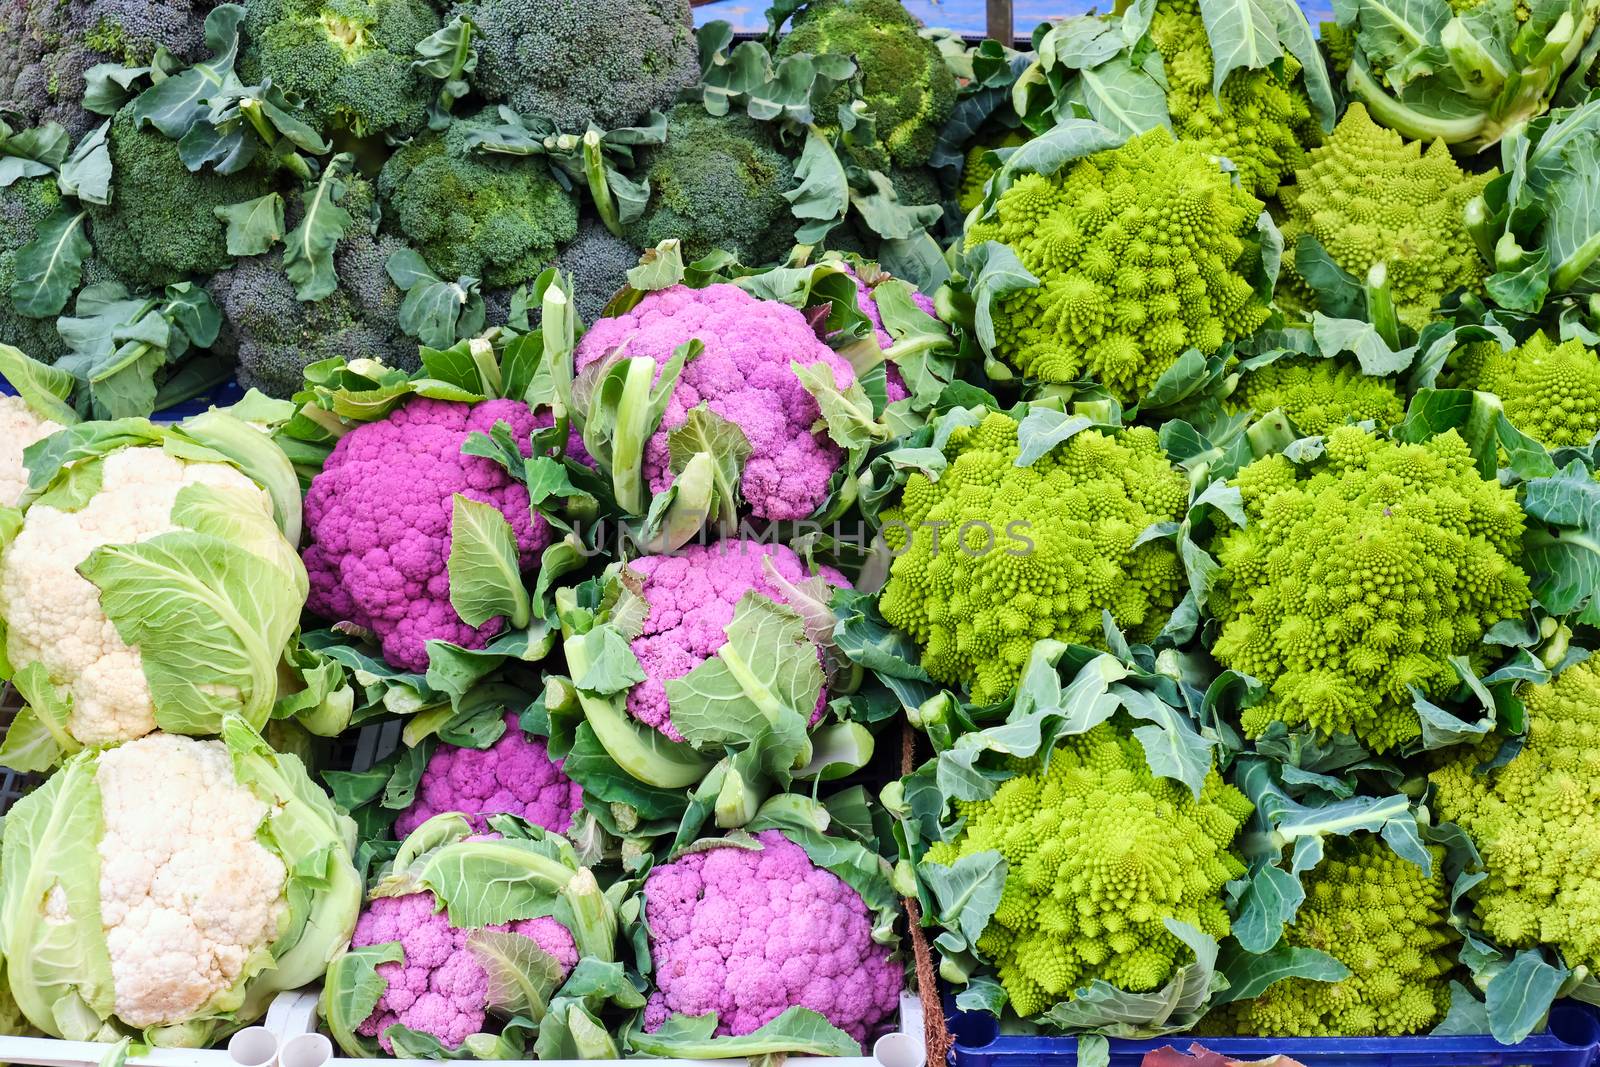 Different kinds of cauliflower and broccoli by elxeneize